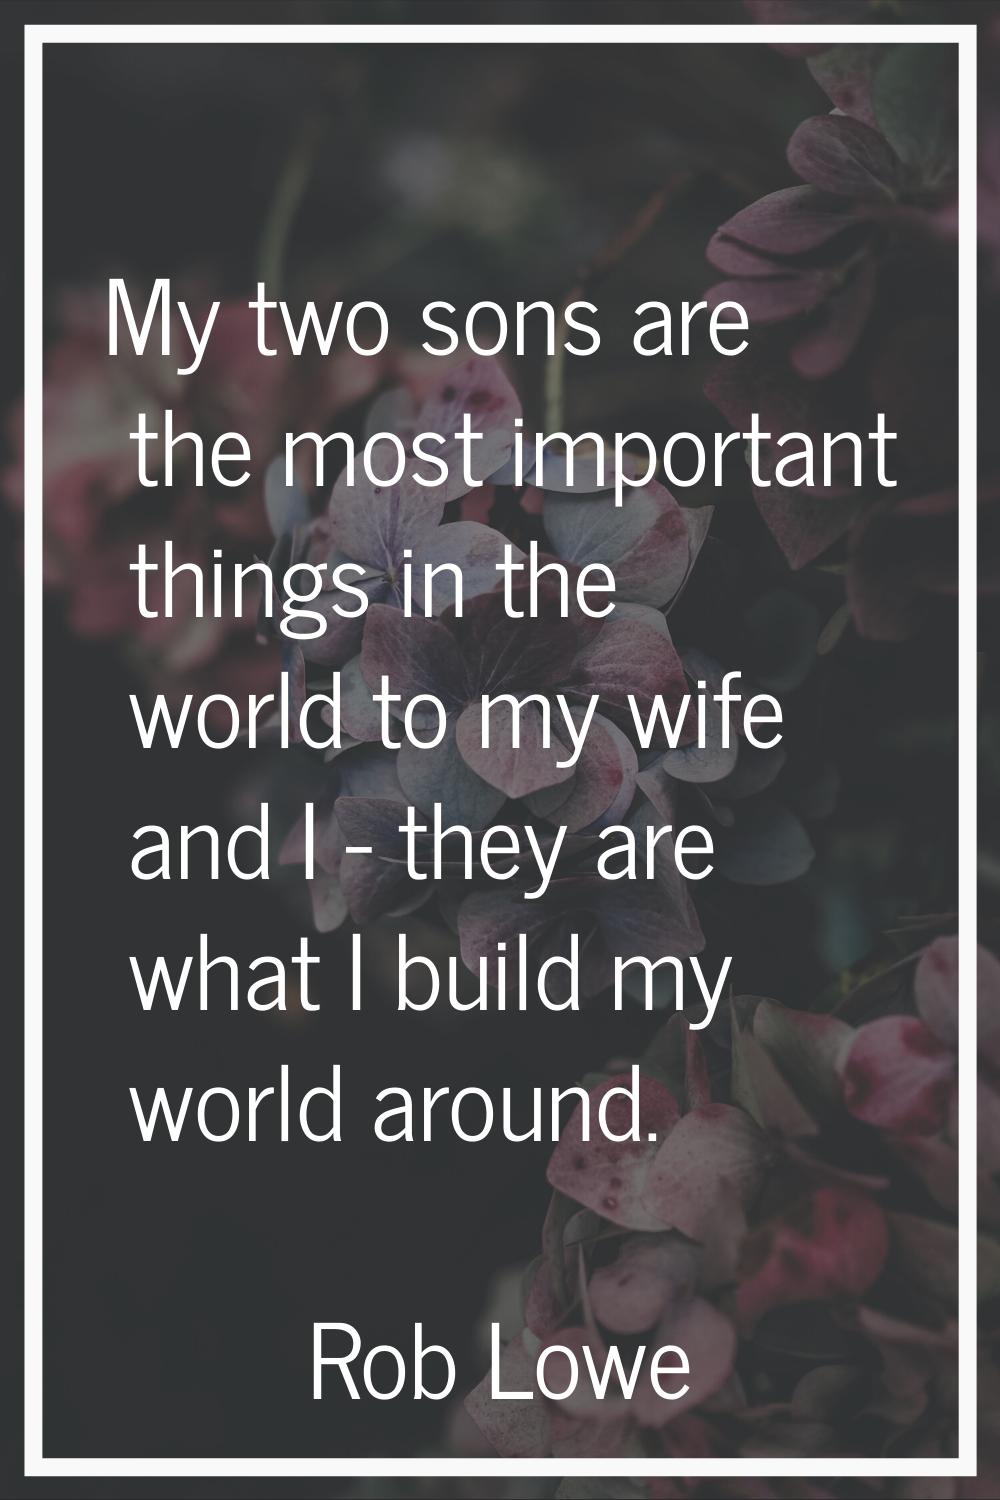 My two sons are the most important things in the world to my wife and I - they are what I build my 